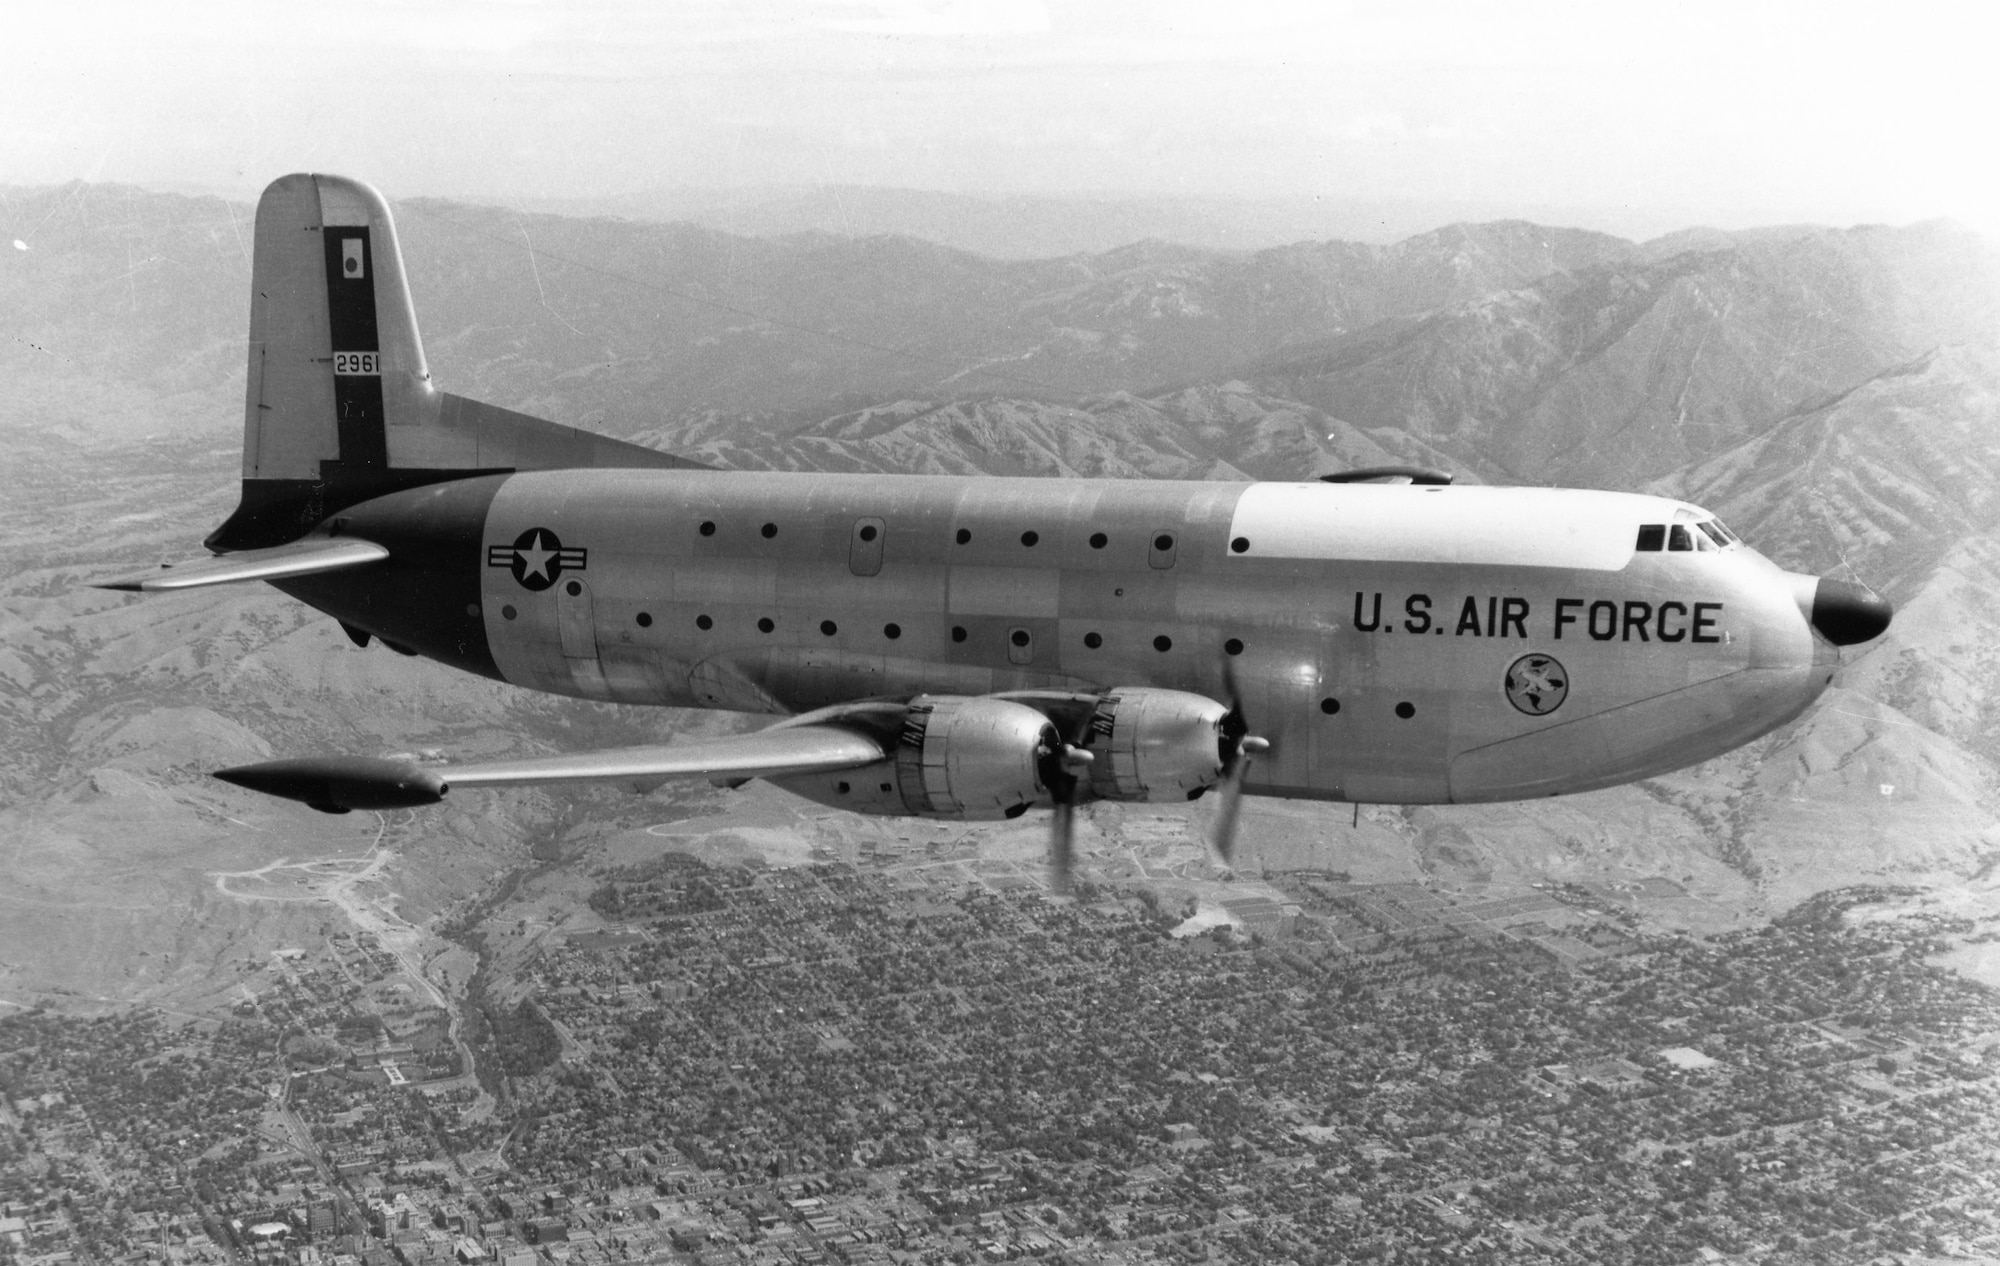 The 28th Military Airlift Squadron flew the Douglas C-124 Globemaster II while a tenant unit at Hill AFB for nearly two decades, from 1953 to 1969.